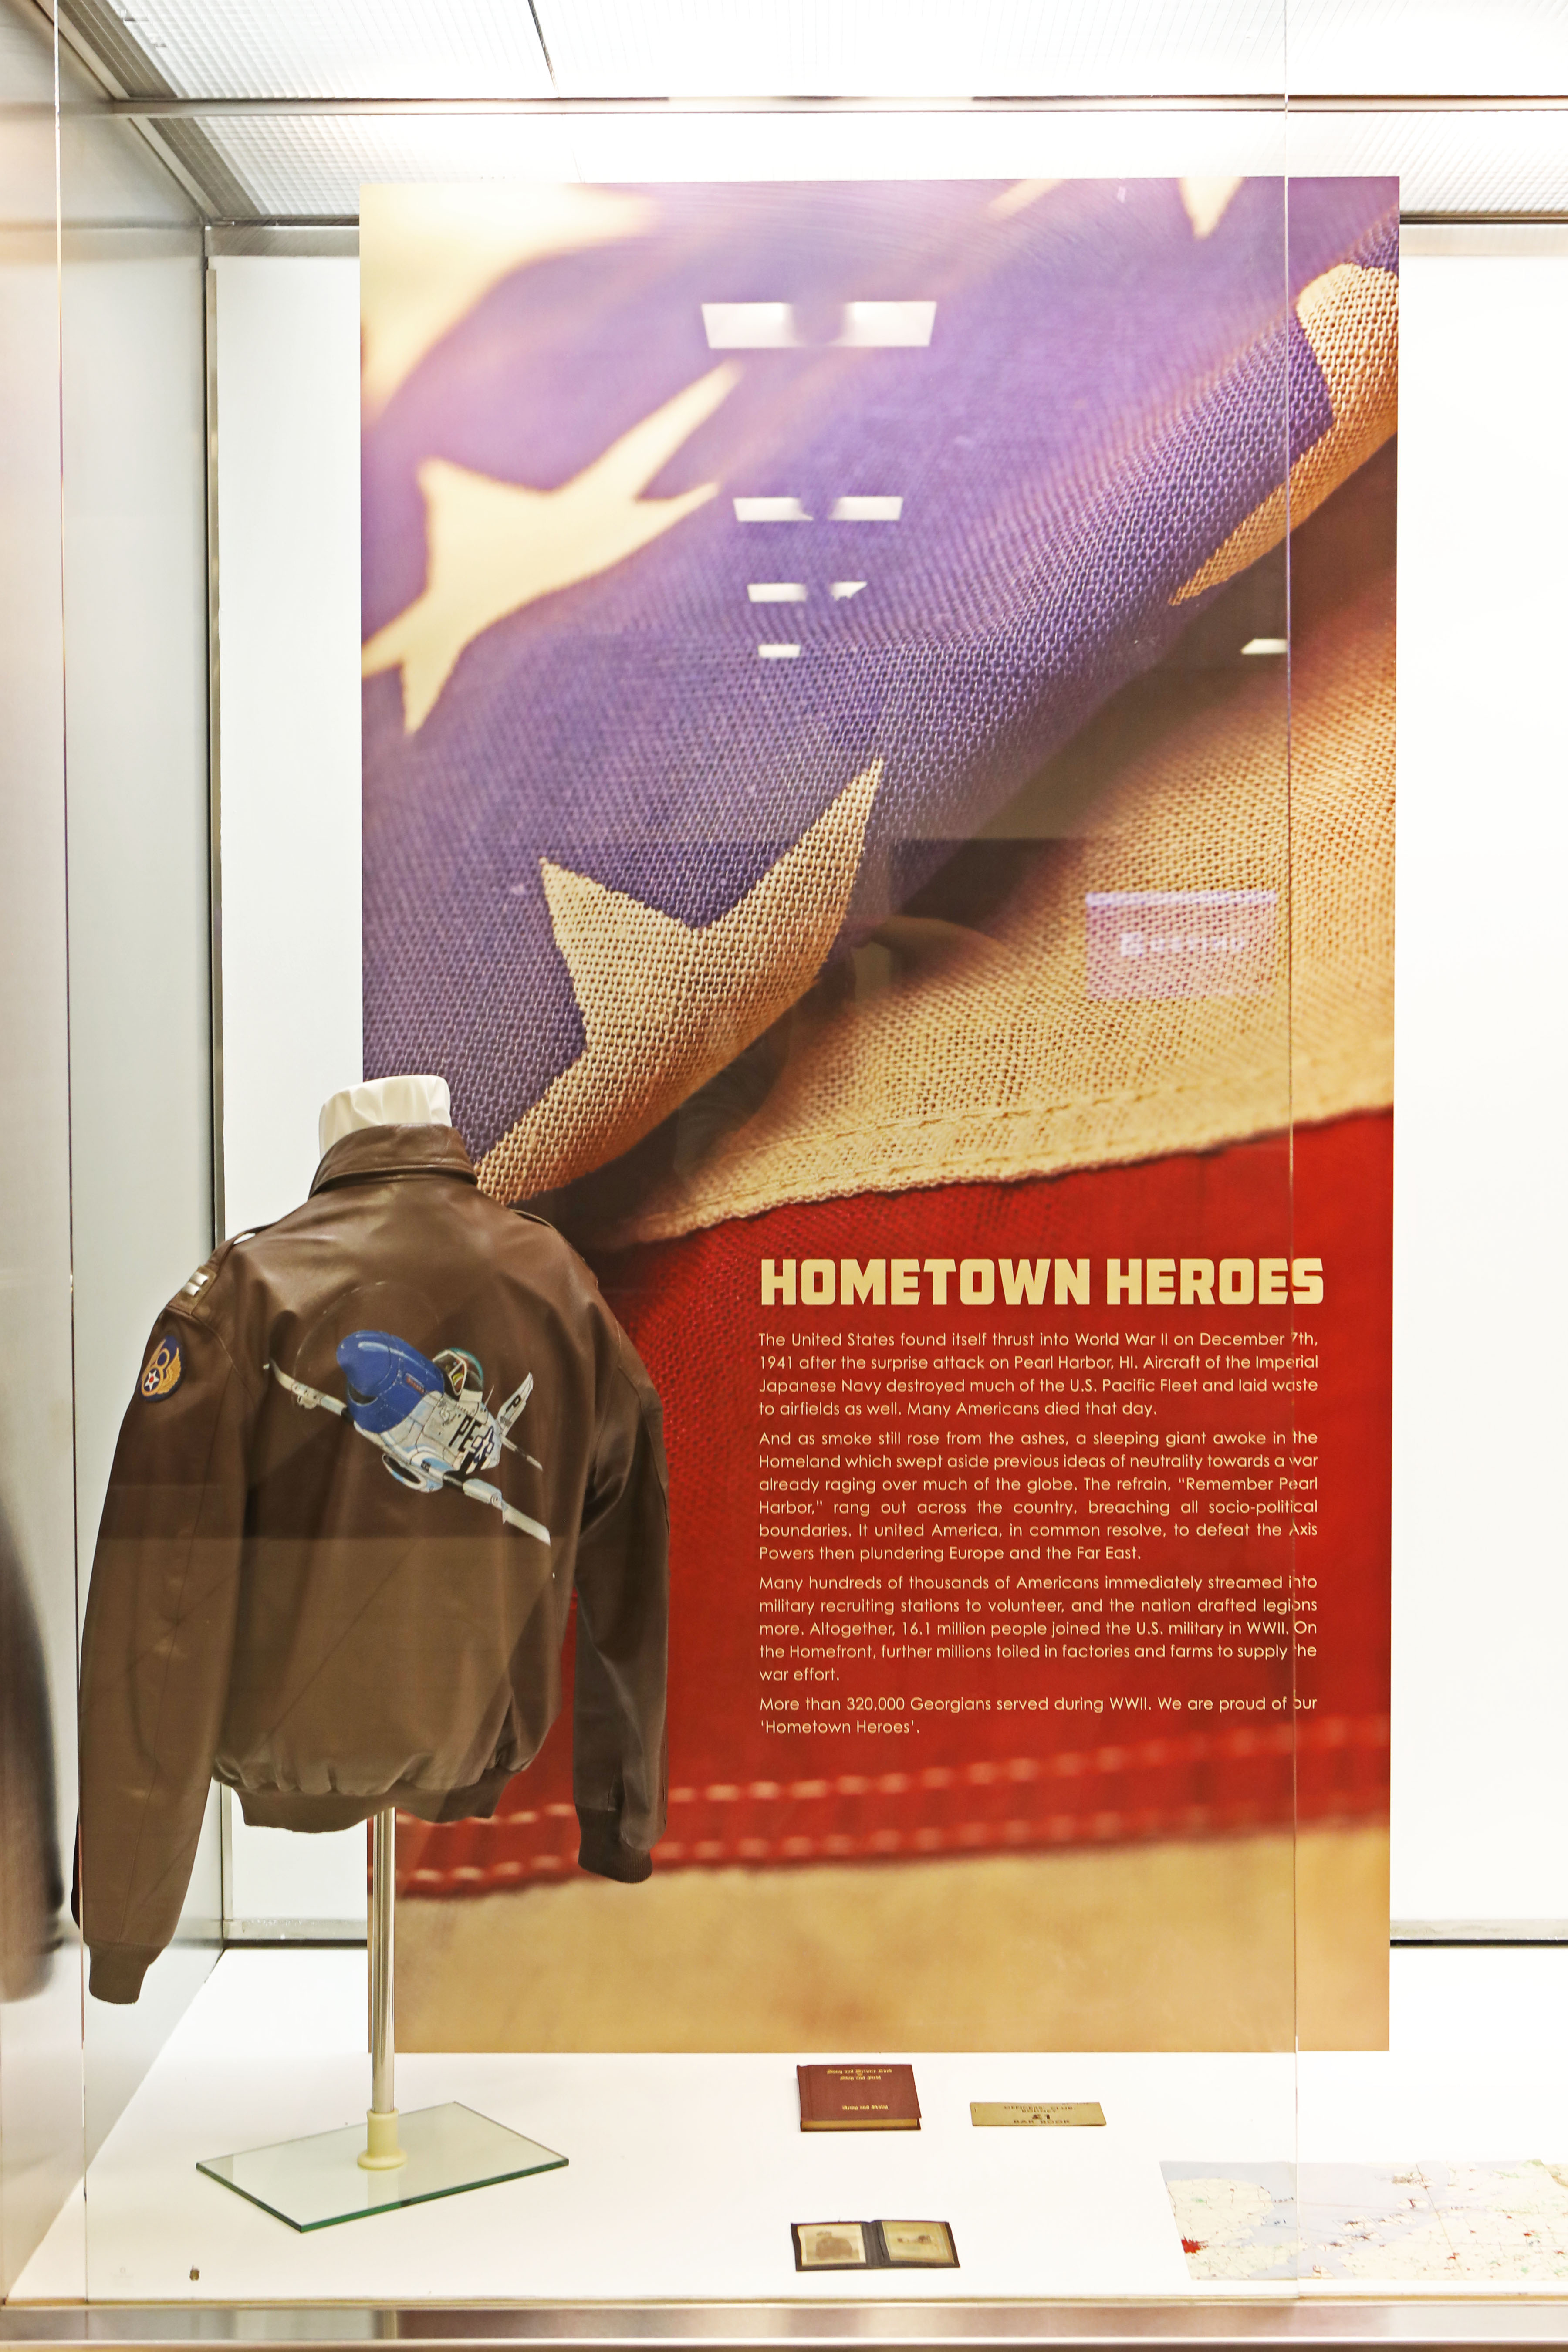 CAF Dixie Wing Honors WWII Heroes, Homefront in Gate Display at Atlanta Airport